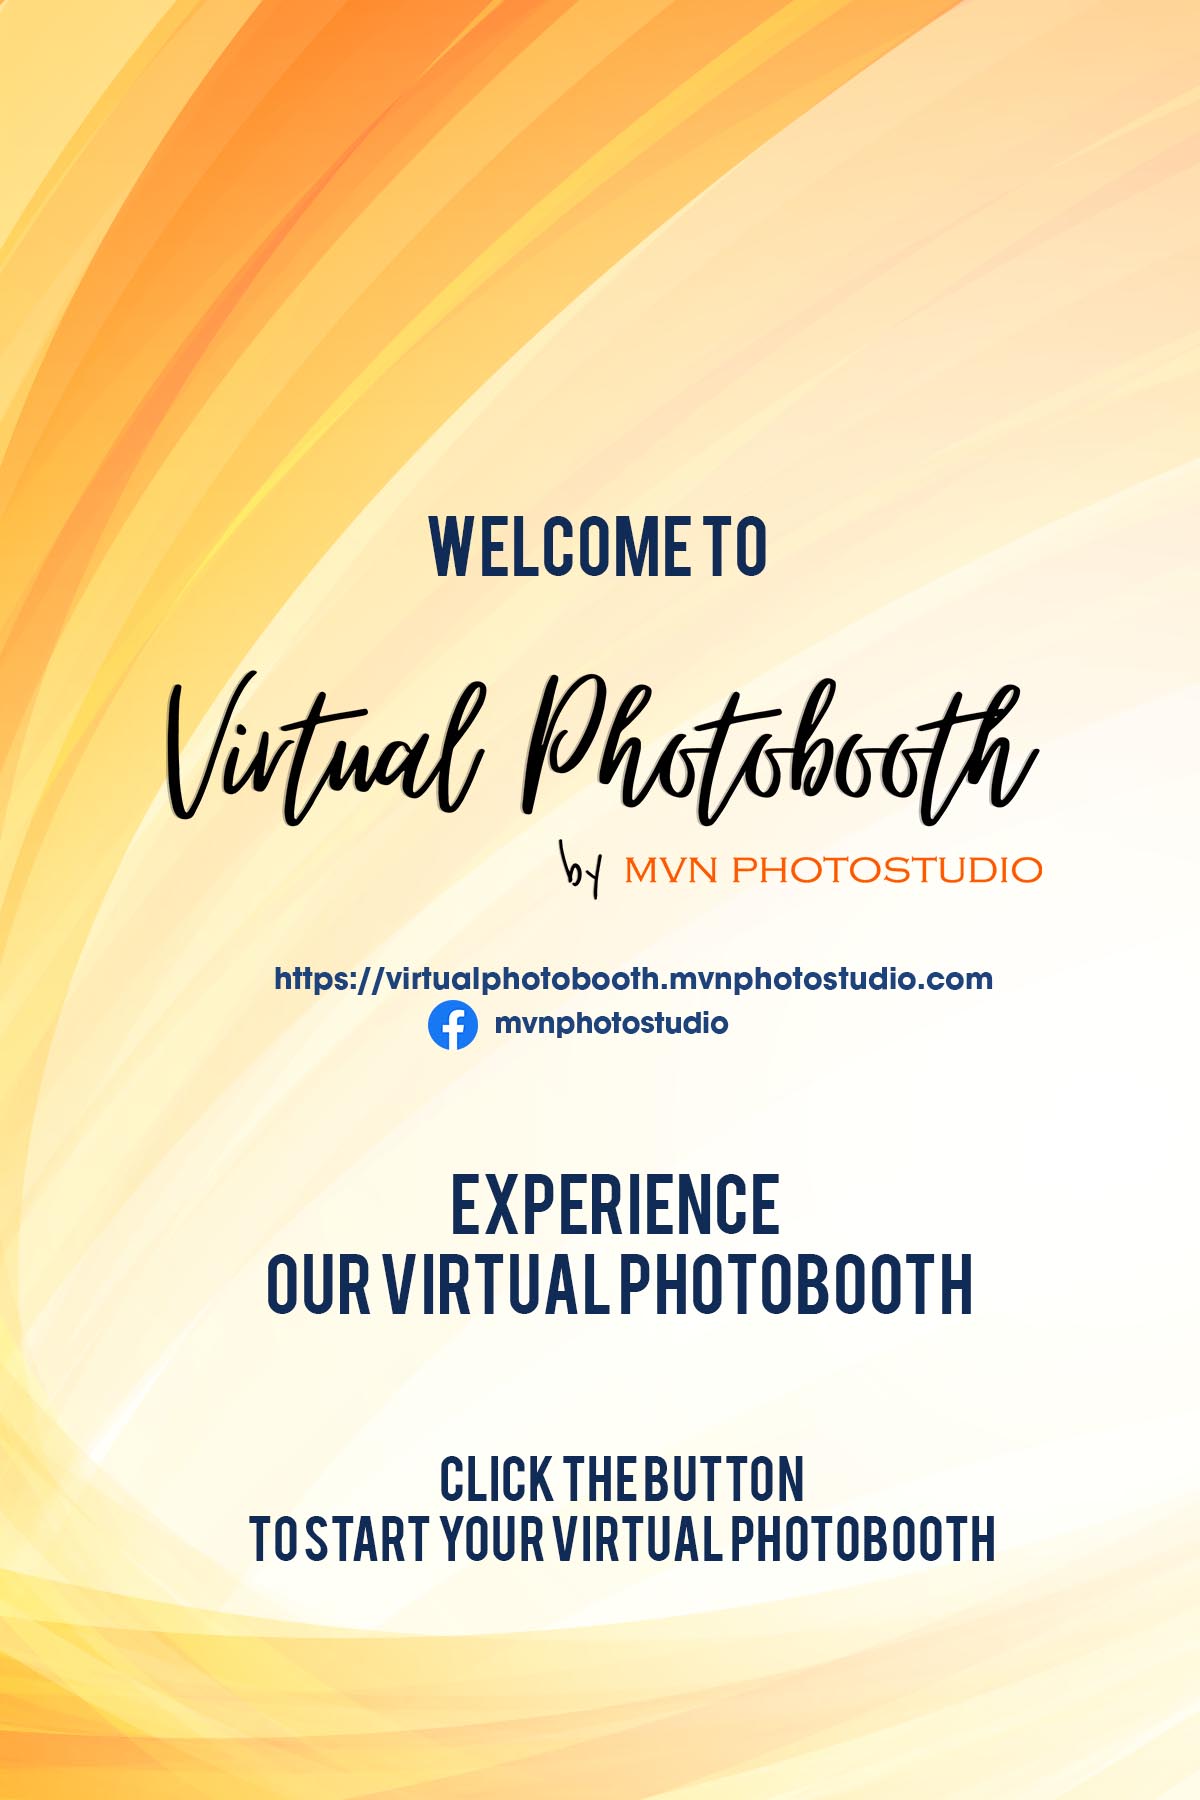 MVN PhotoStudio Events and Workshops